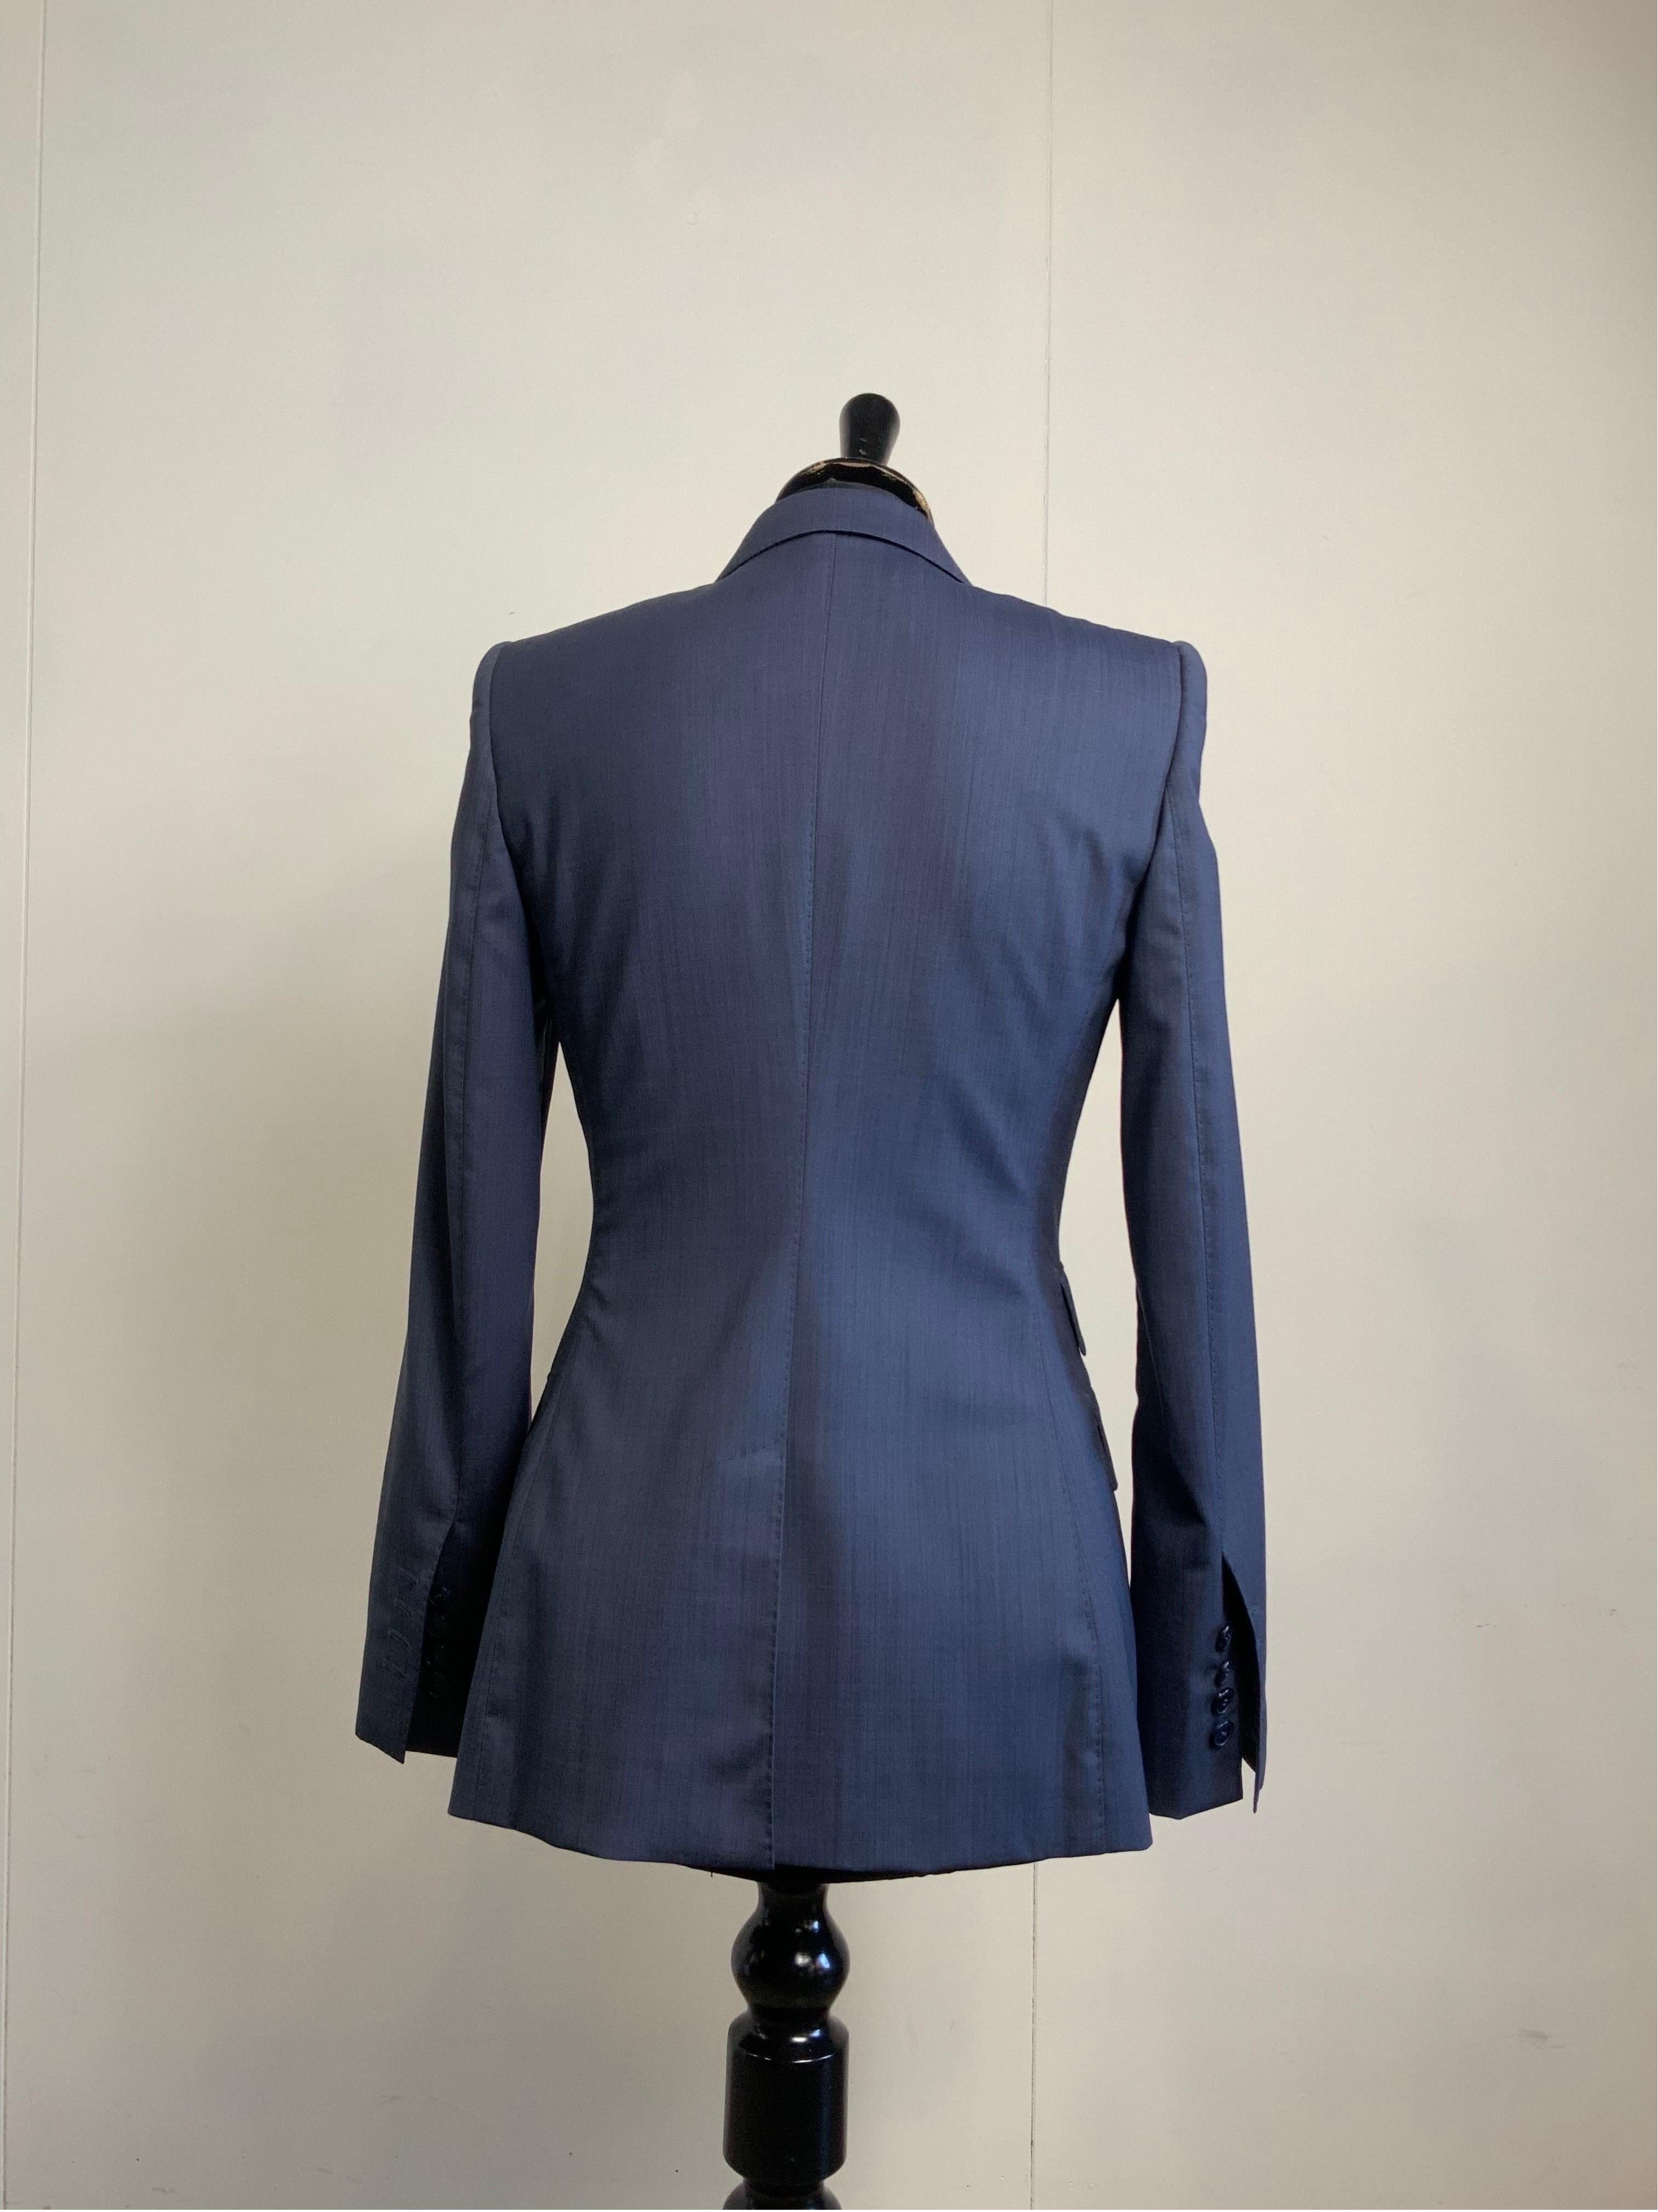 Dolce and Gabbana blue jacket + vest set. In Excellent Condition For Sale In Carnate, IT